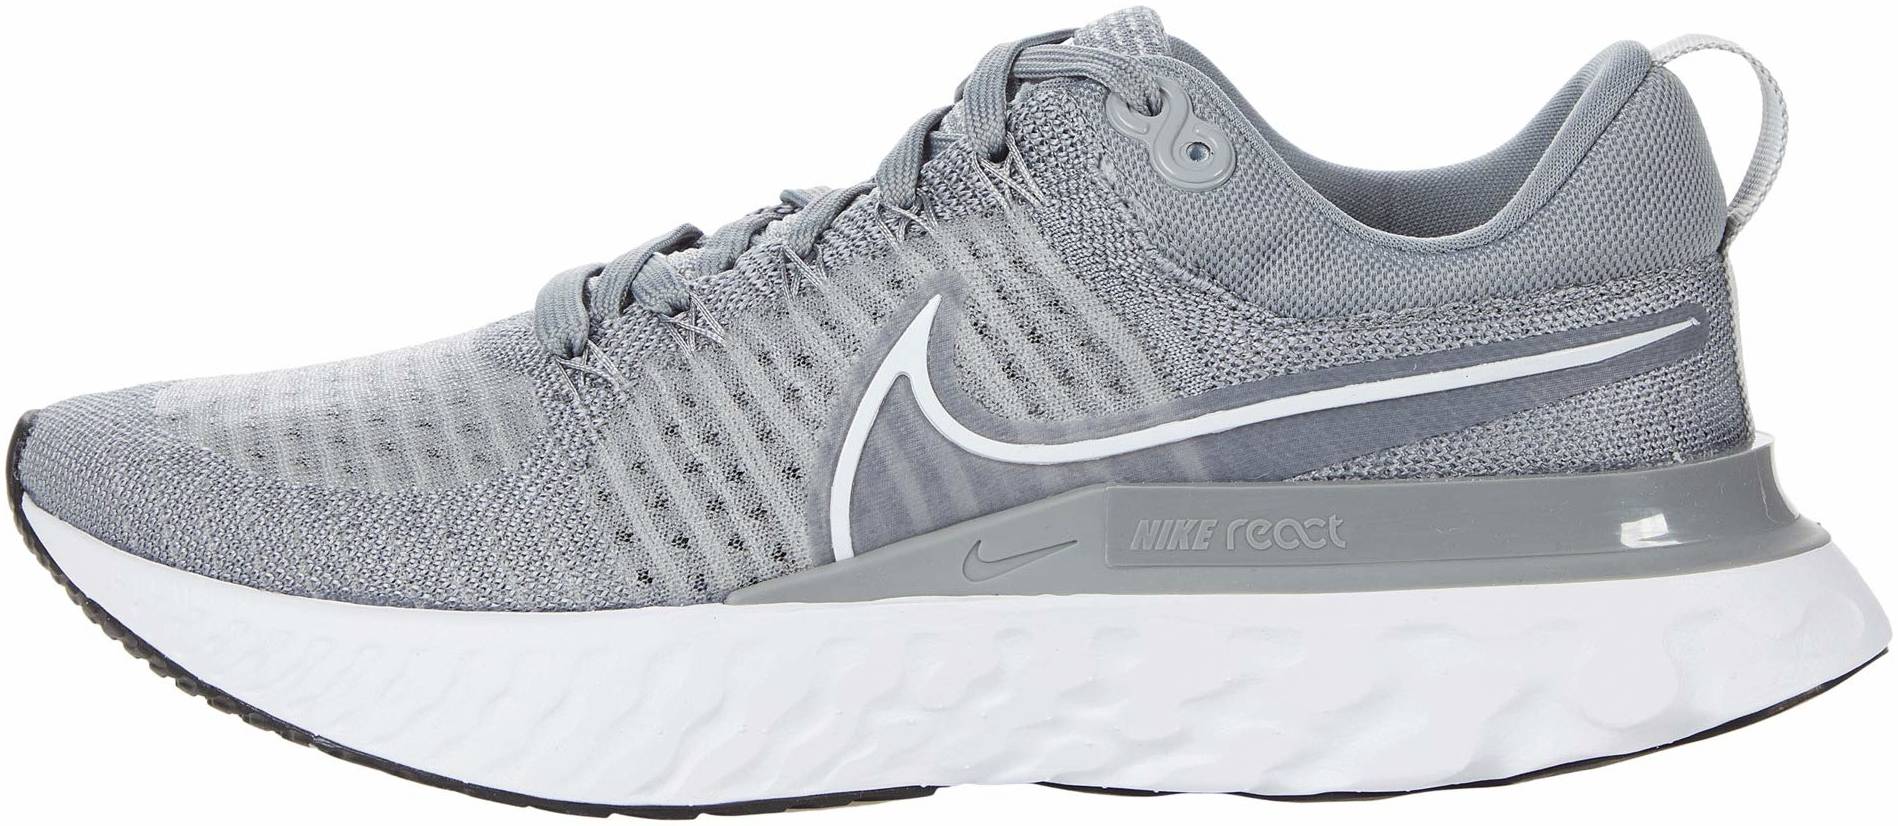 nike shoes grey and white